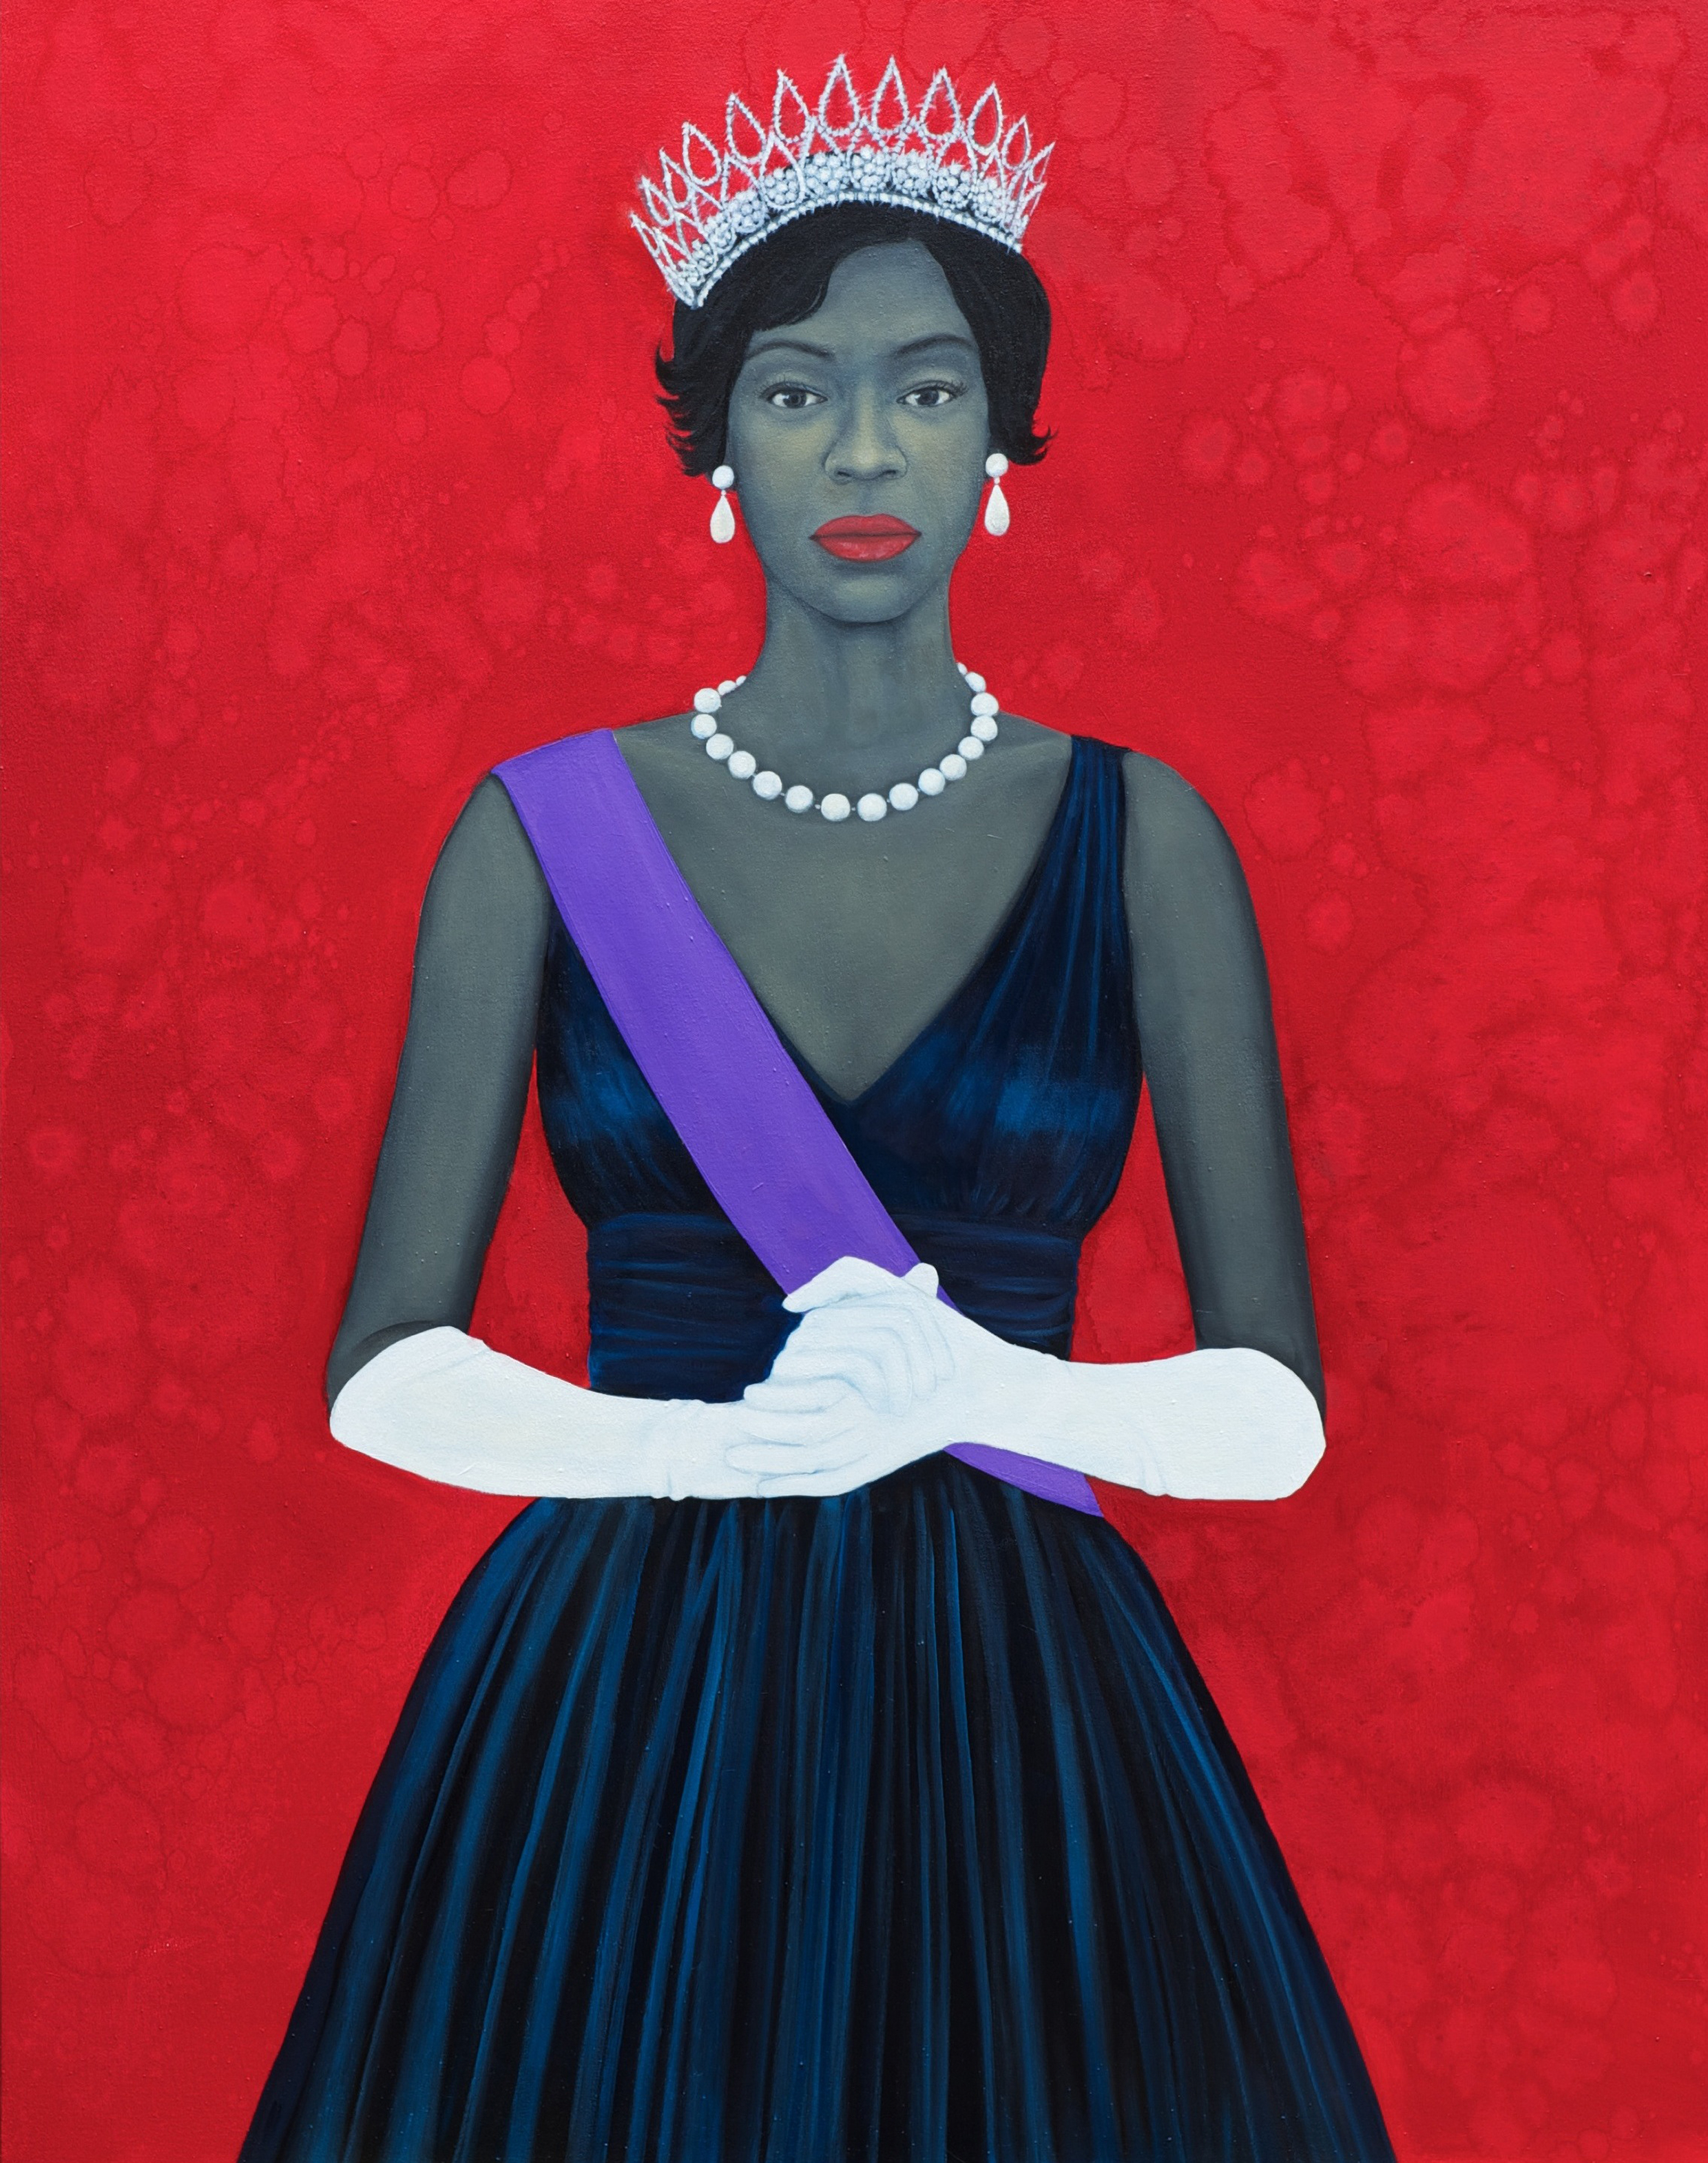 a woman standing, holding her hands in front of her, wearing a dark blue dress, white gloves, pearl jewelry and a tiara against a bright red background